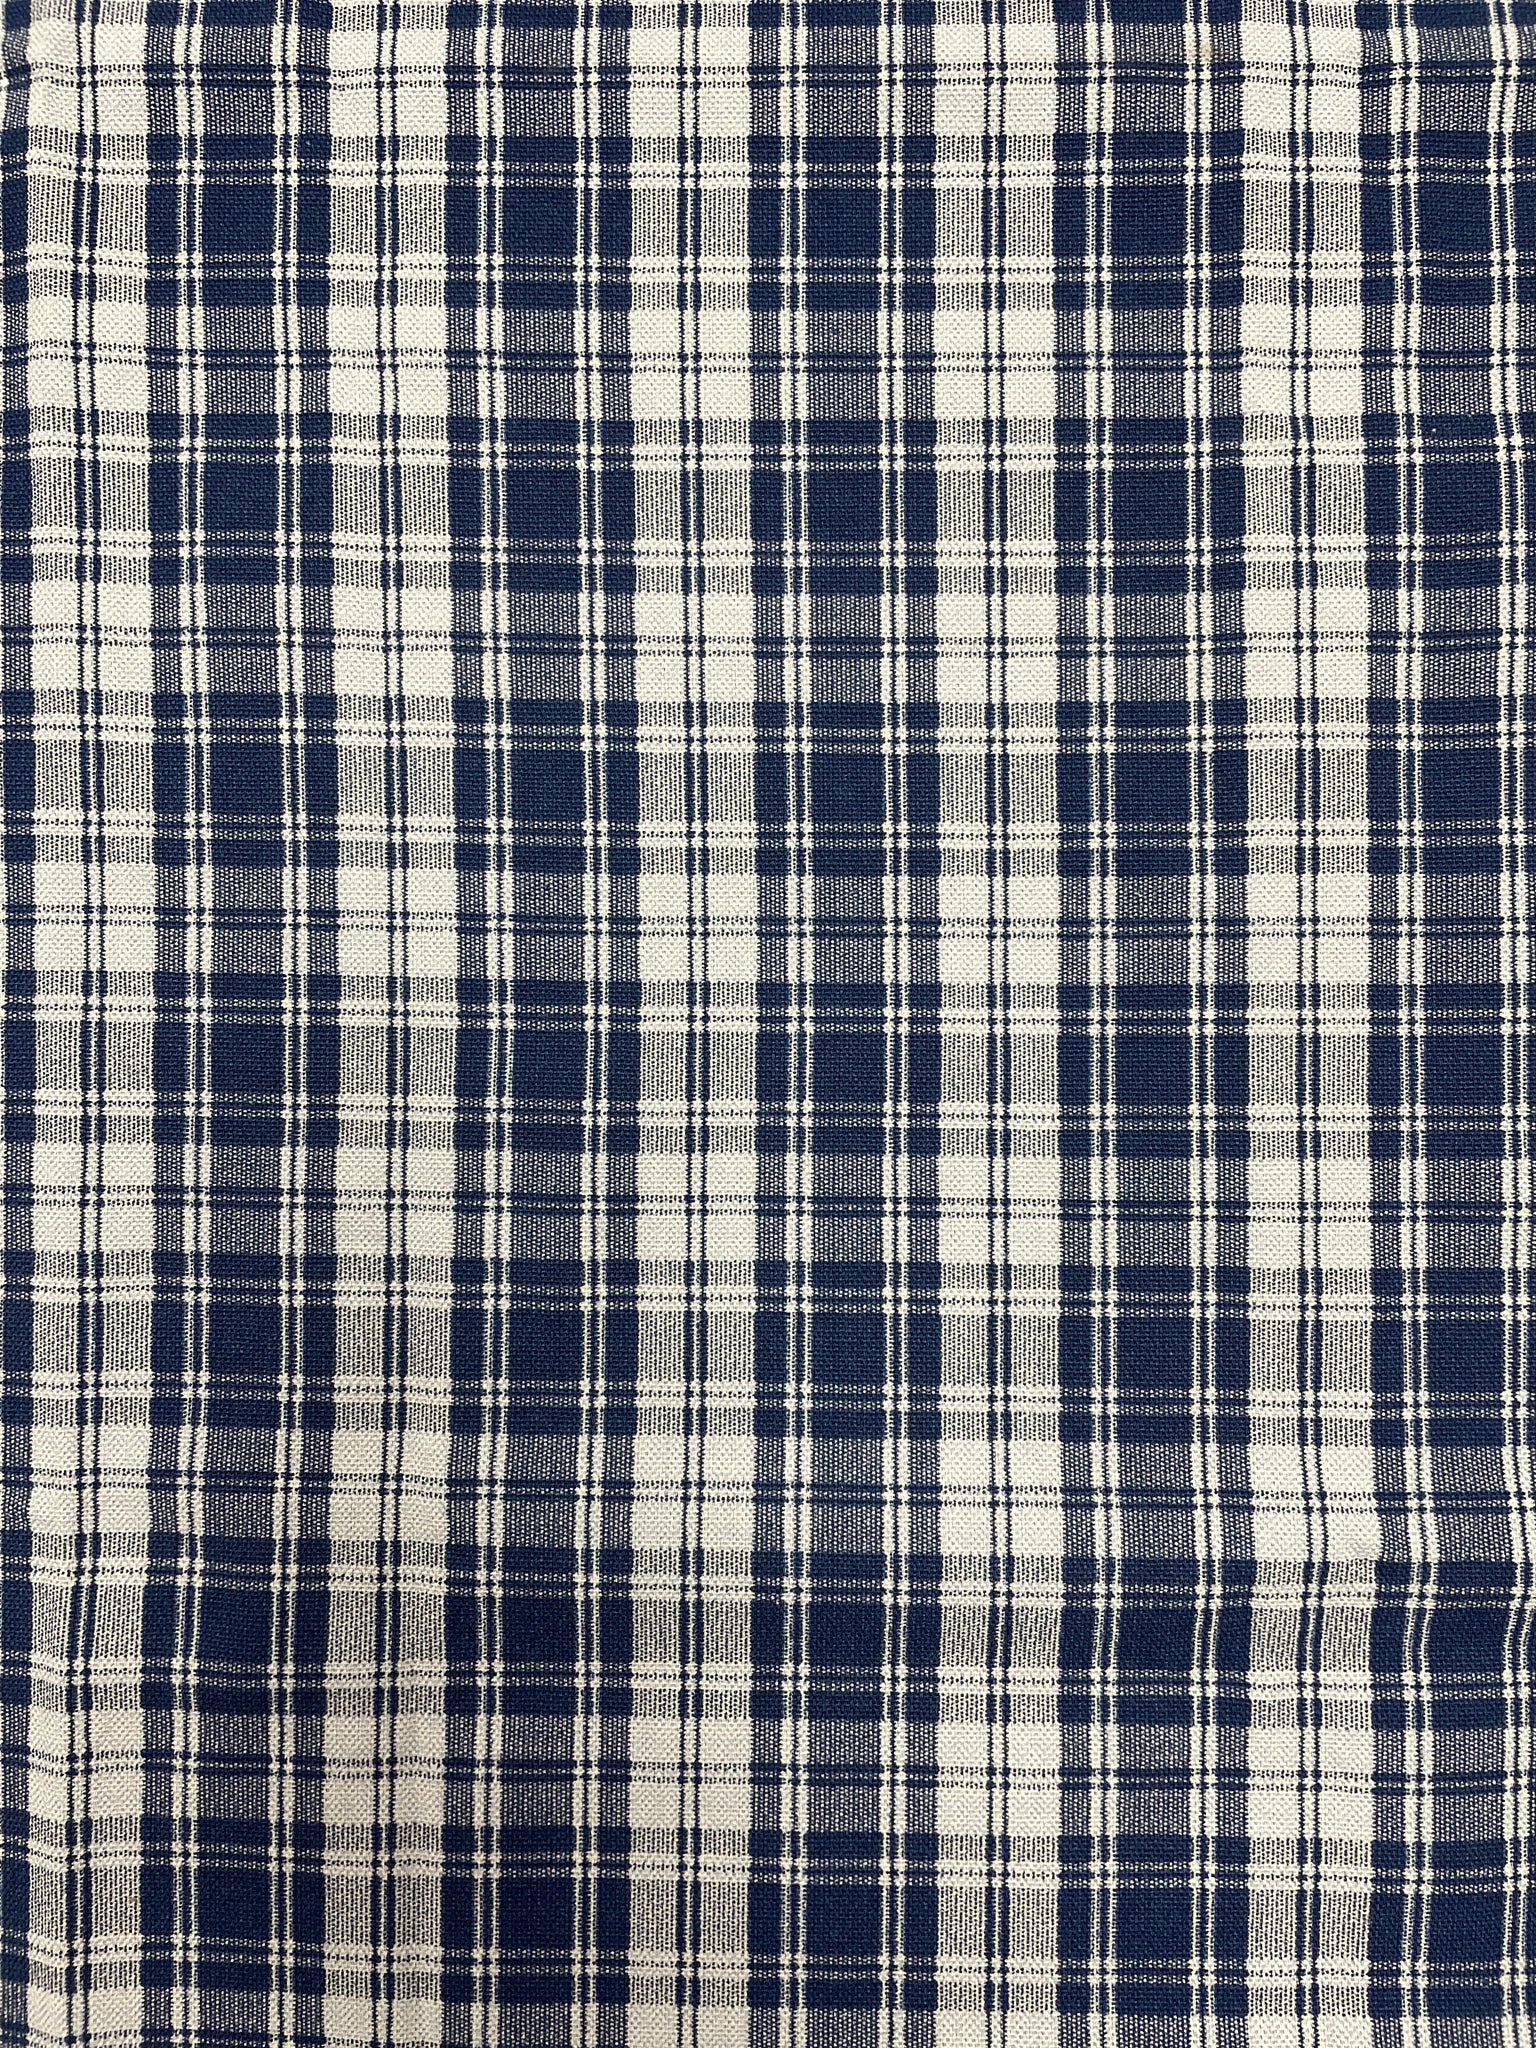 2021 1 YD Cotton Printed Plaid - Blue and White